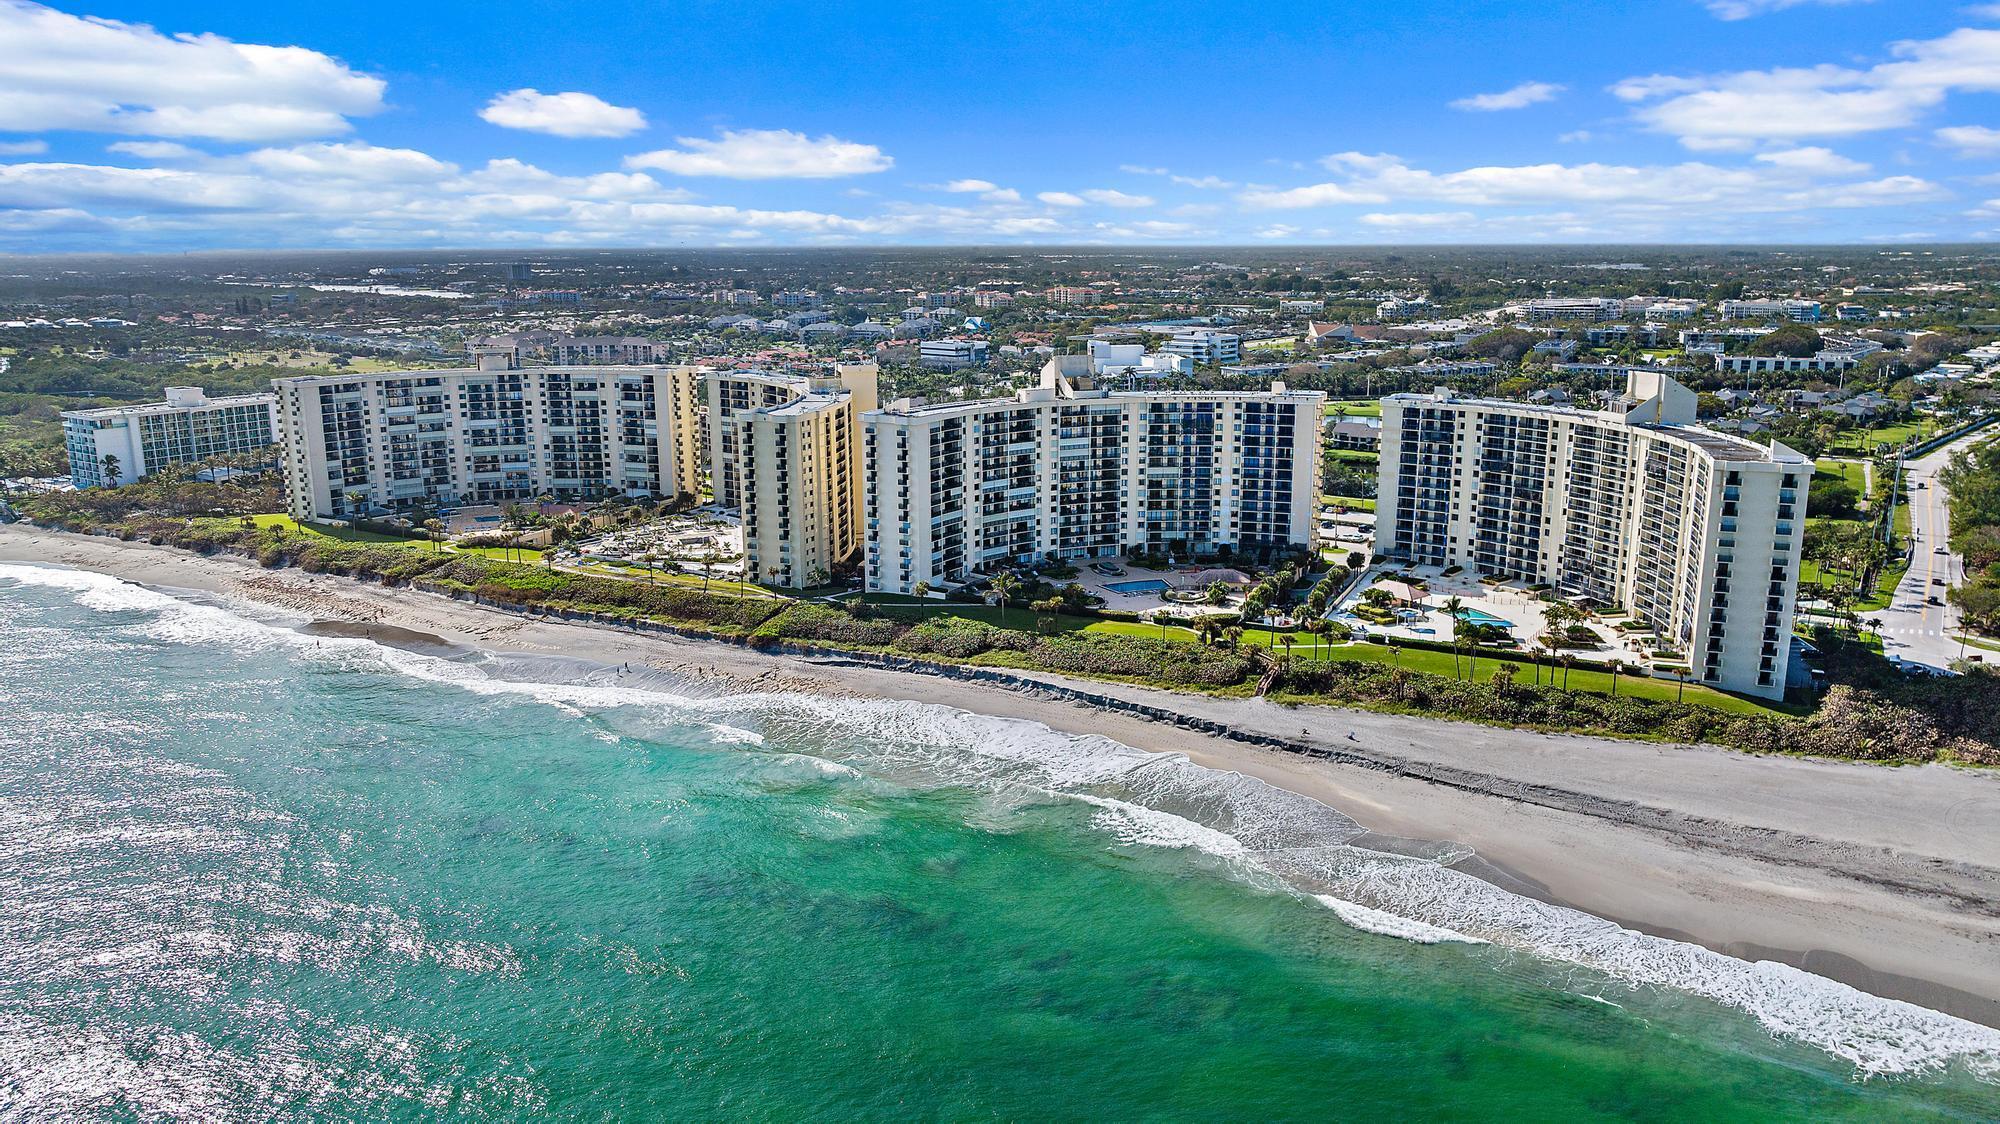 Location! Location! Location!Right by the Jupiter Inlet and Dubois Park. This remodeled large 1500 sq ft condo is 300 steps from their private beach!NO ASSESSMENTS! Due to the temporary increase in HOA, seller is willing to pay 2024 HOA costs at closing.It is walking distance or golfcart taxi to Publix, Cinopolis, Guanabannas, Utiki, Square Grouper, Food Shack, Double Roads, Harbourside miniature golf and much more...You can feel the ocean breeze. Remodeled kitchen and baths. Home warranty on all major appliances til 3/26. Carport, tennis, sauna, pool and 24 guard at gate.